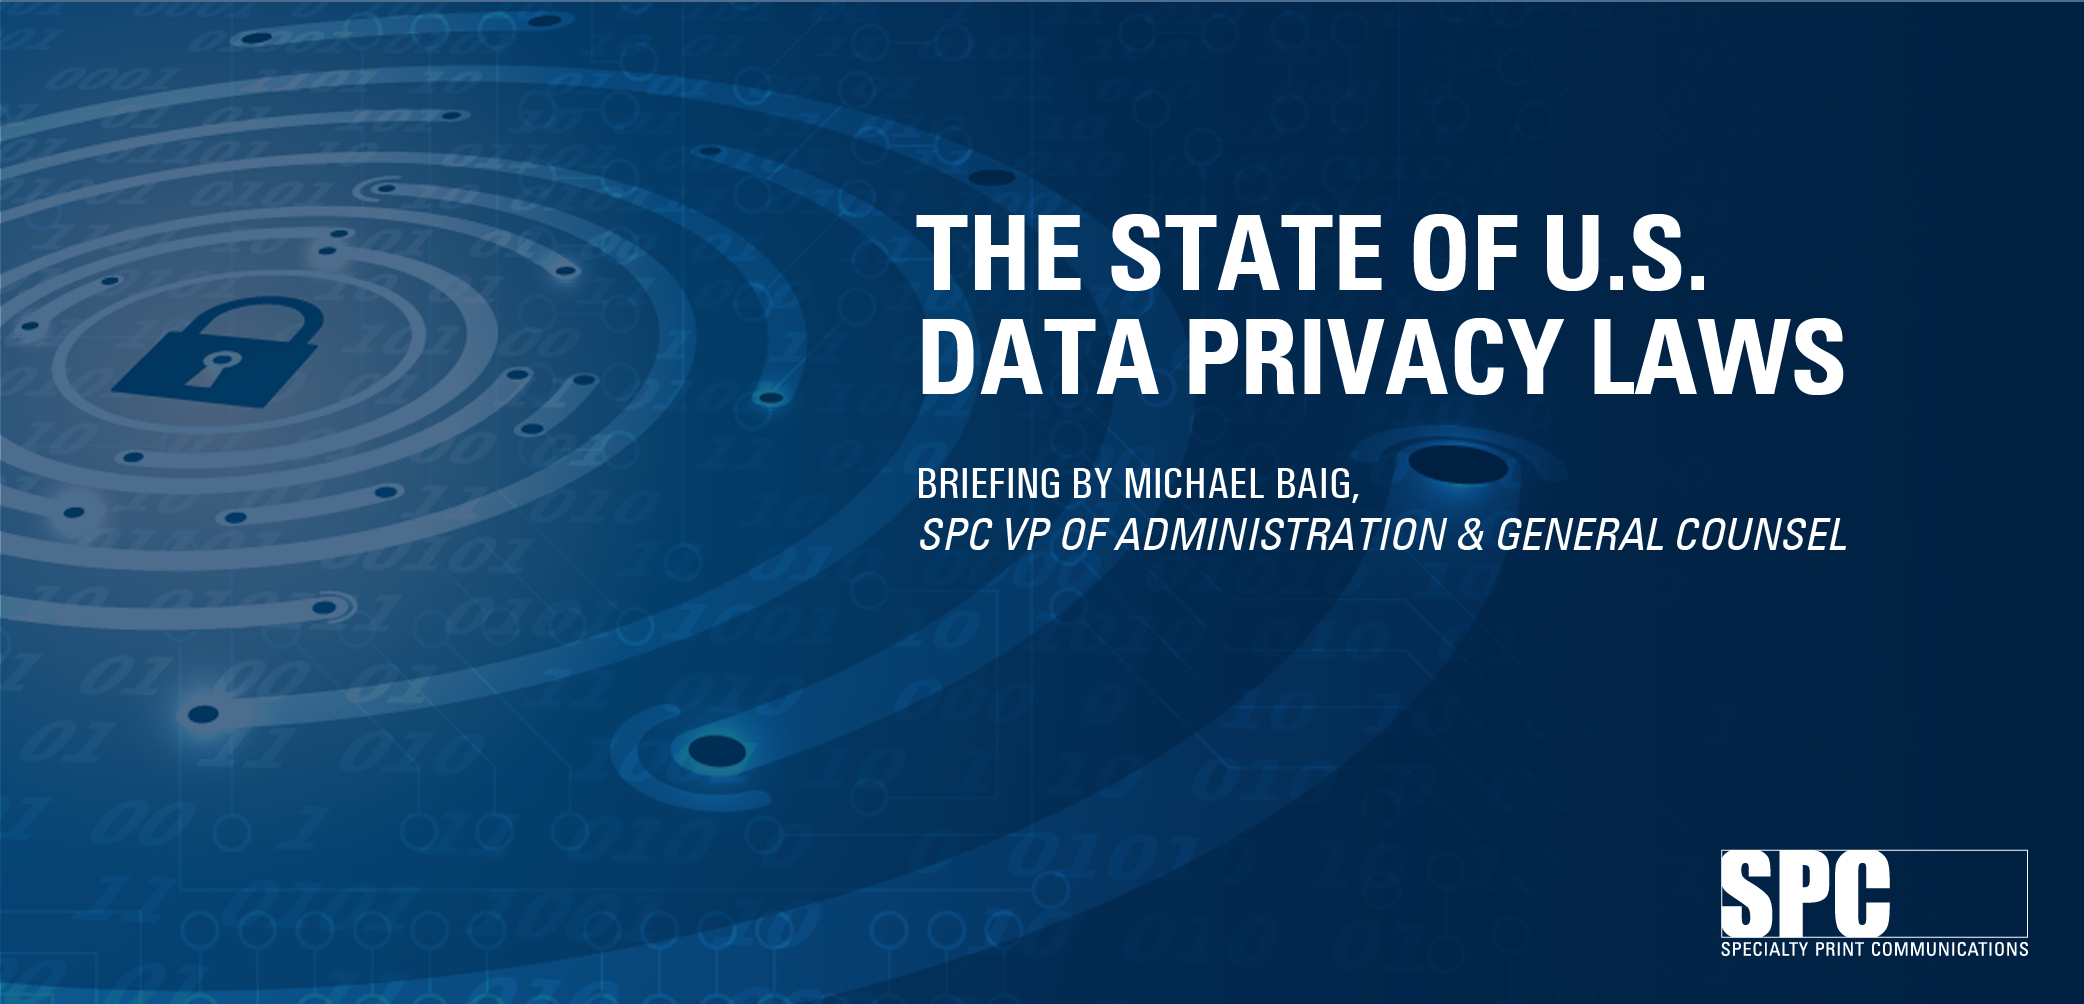 THE STATE OF U.S. DATA PRIVACY LAWS